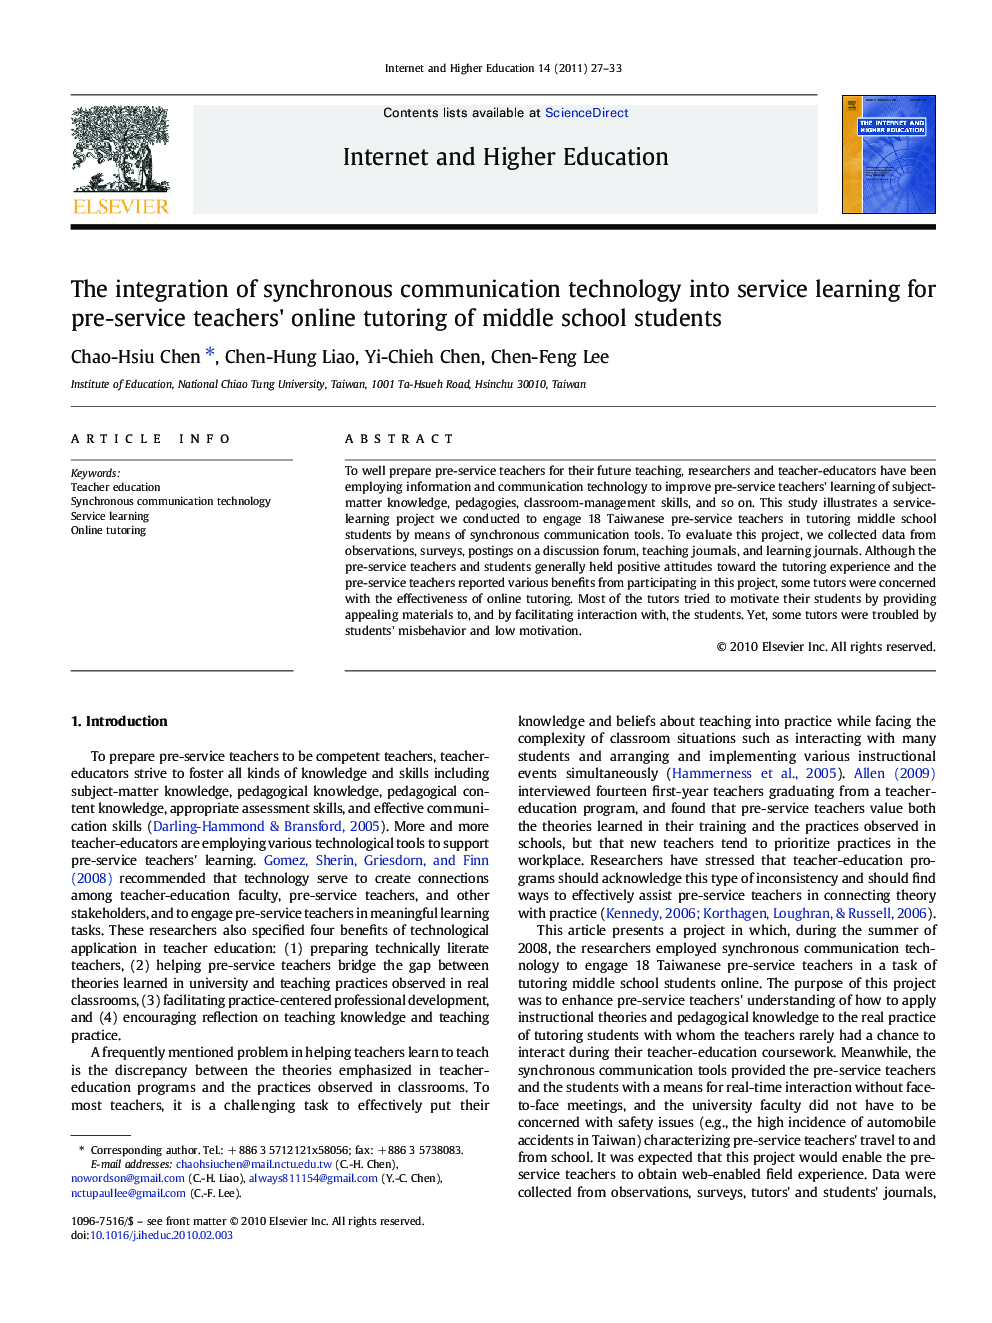 The integration of synchronous communication technology into service learning for pre-service teachers' online tutoring of middle school students